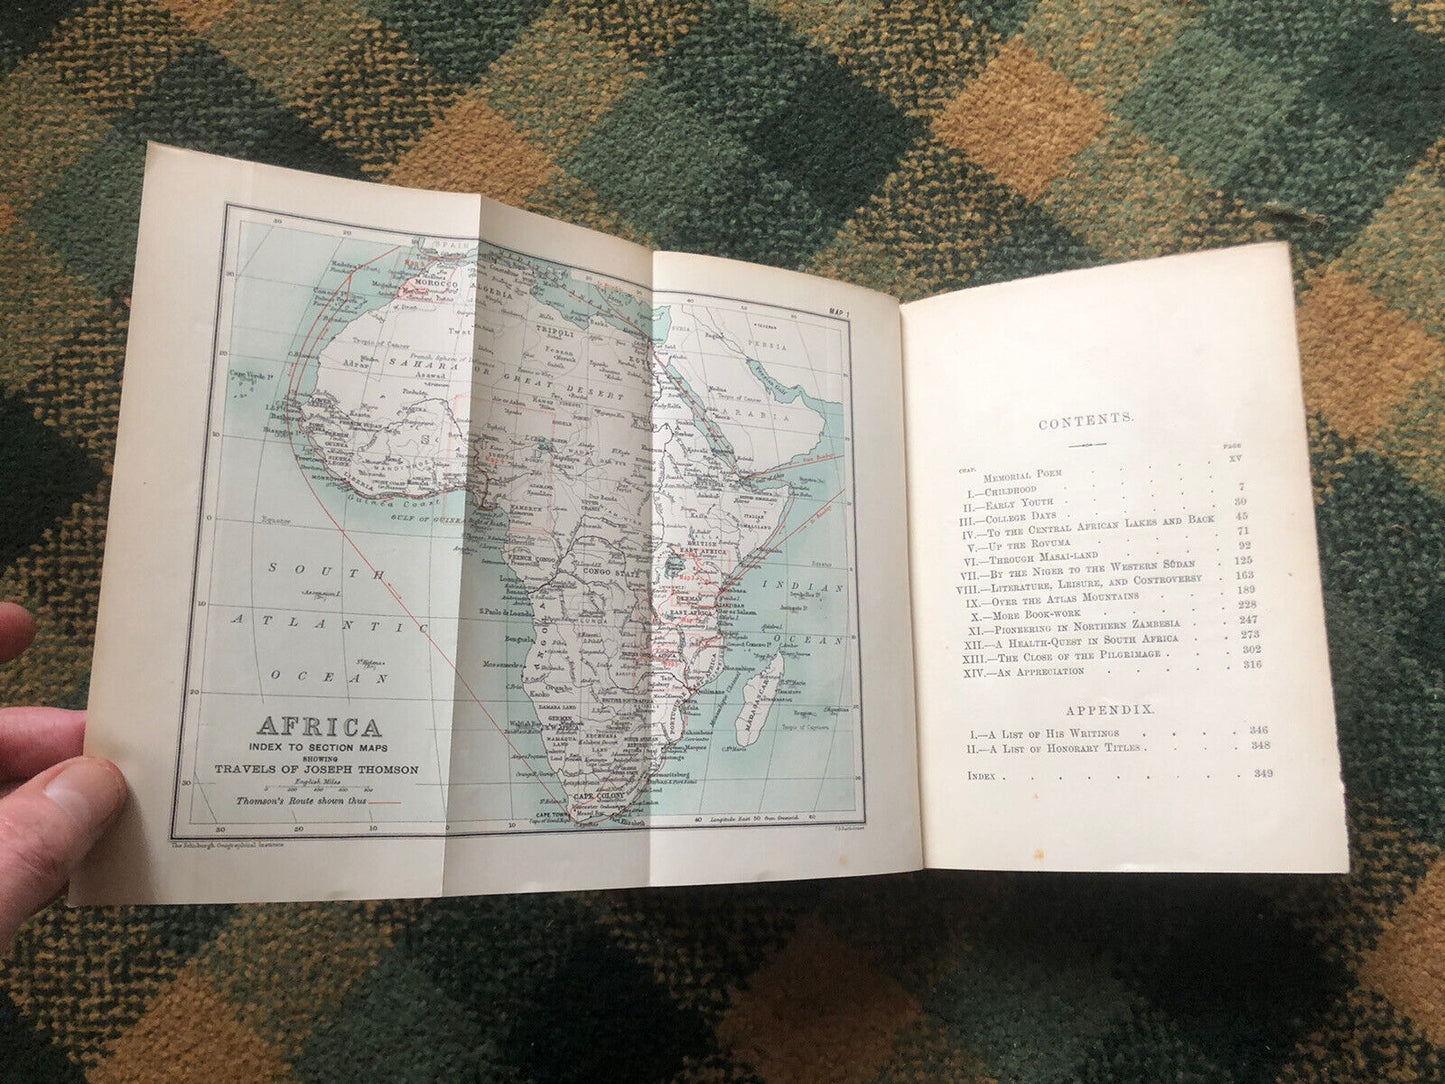 Joseph Thomson African Explorer A Biography by His Brother Rev J B Thomson 1897